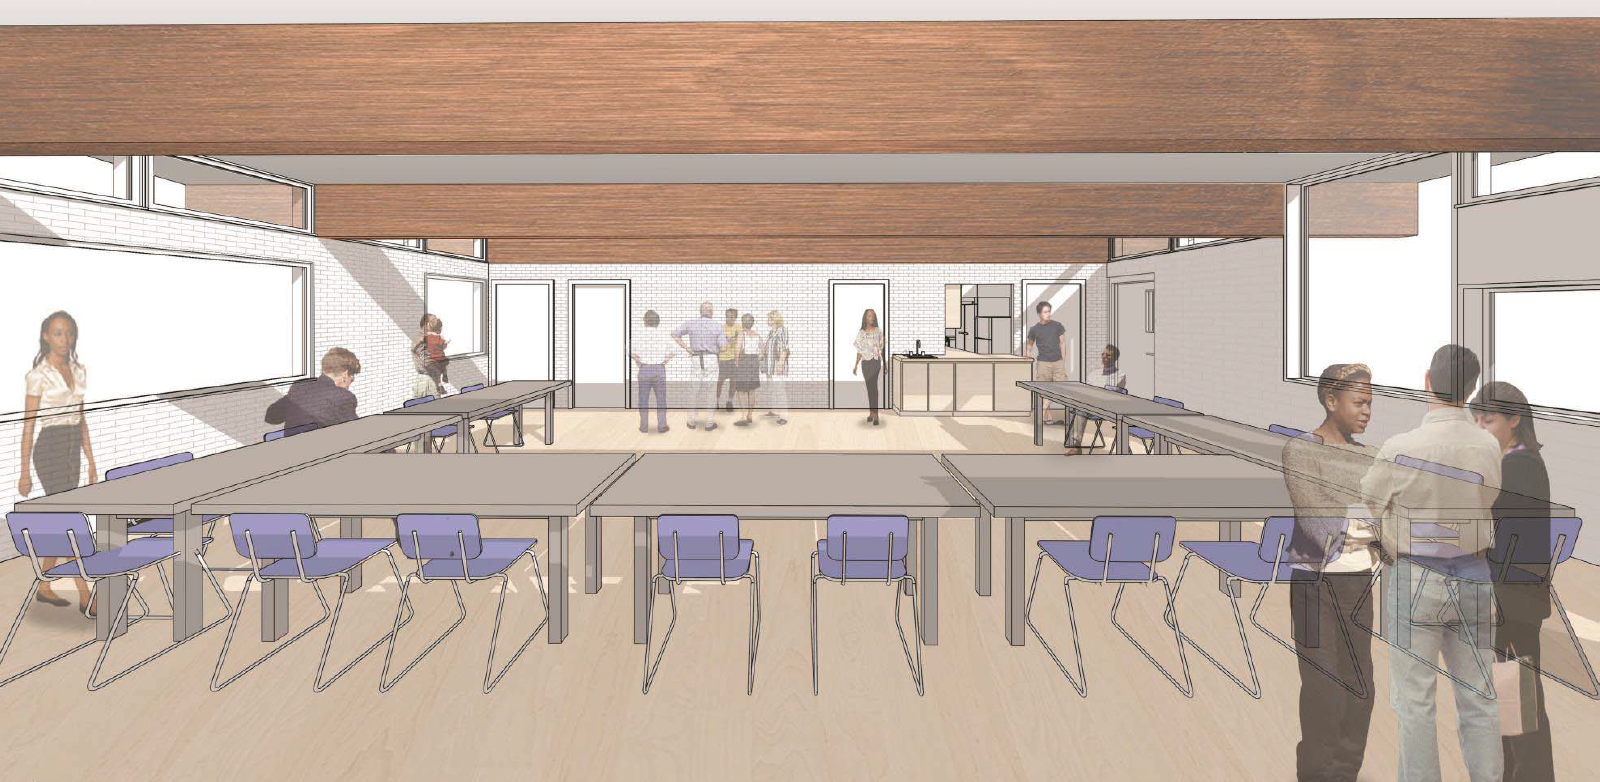 A rendering of the proposed design for the interior of the Topham Park Clubhouse which includes large community rooms with sinks and counter space for community programming.